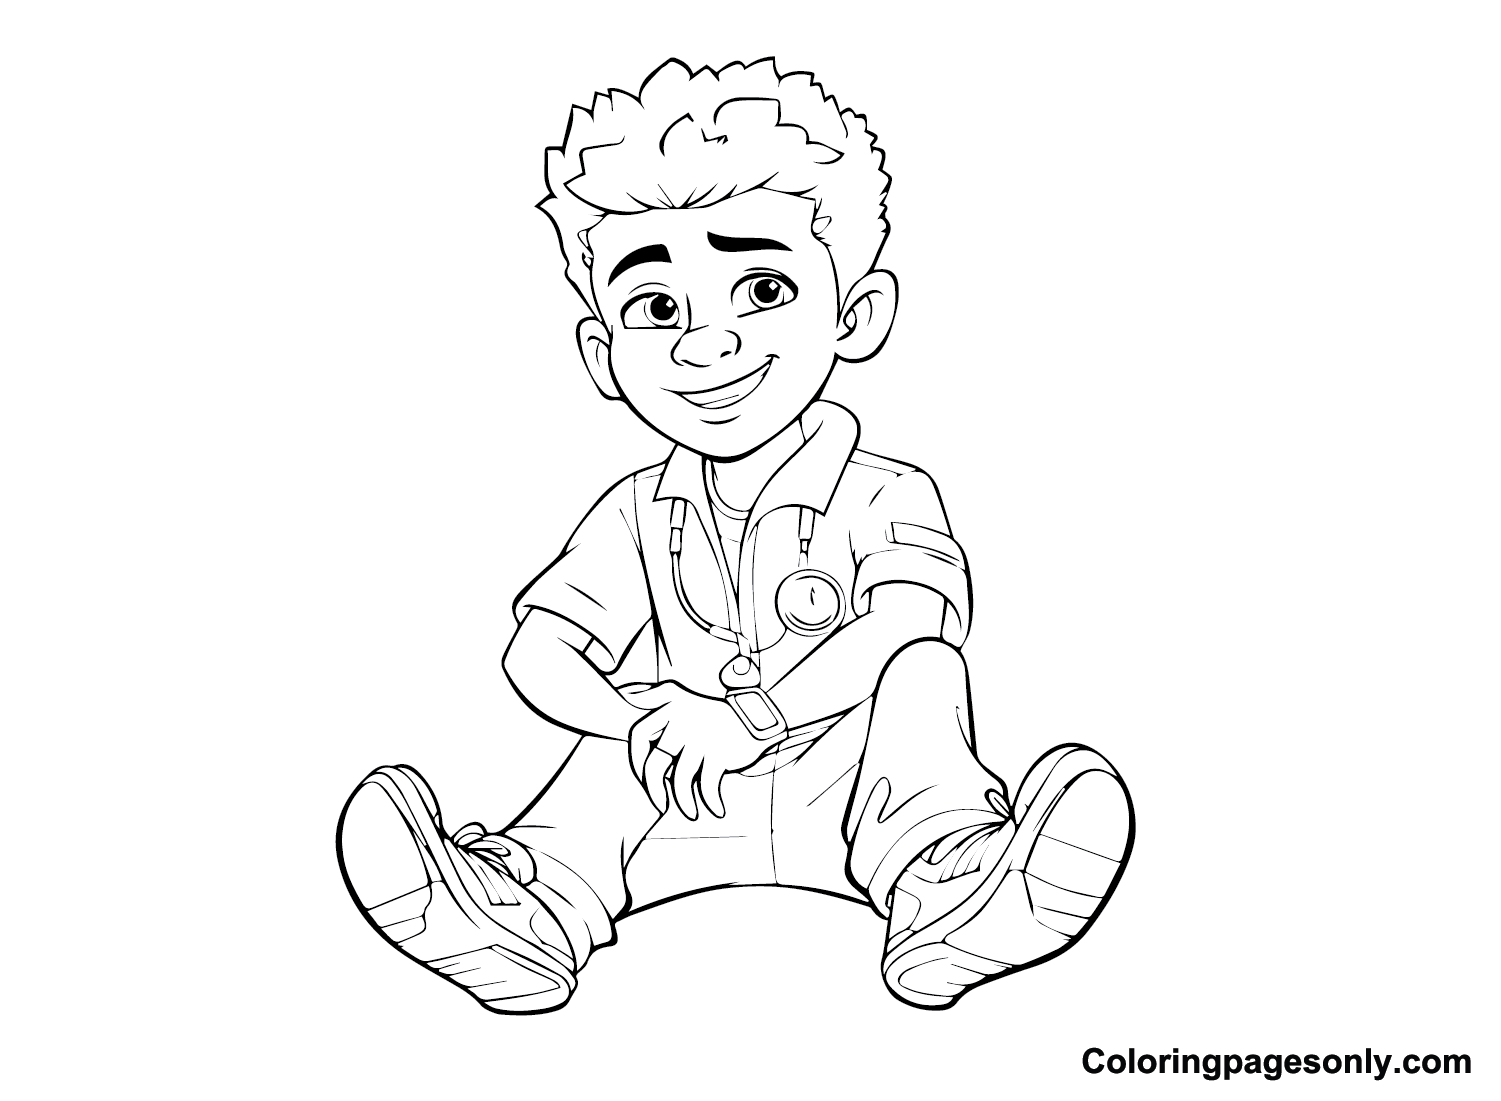 Printable Blueface Coloring Pages